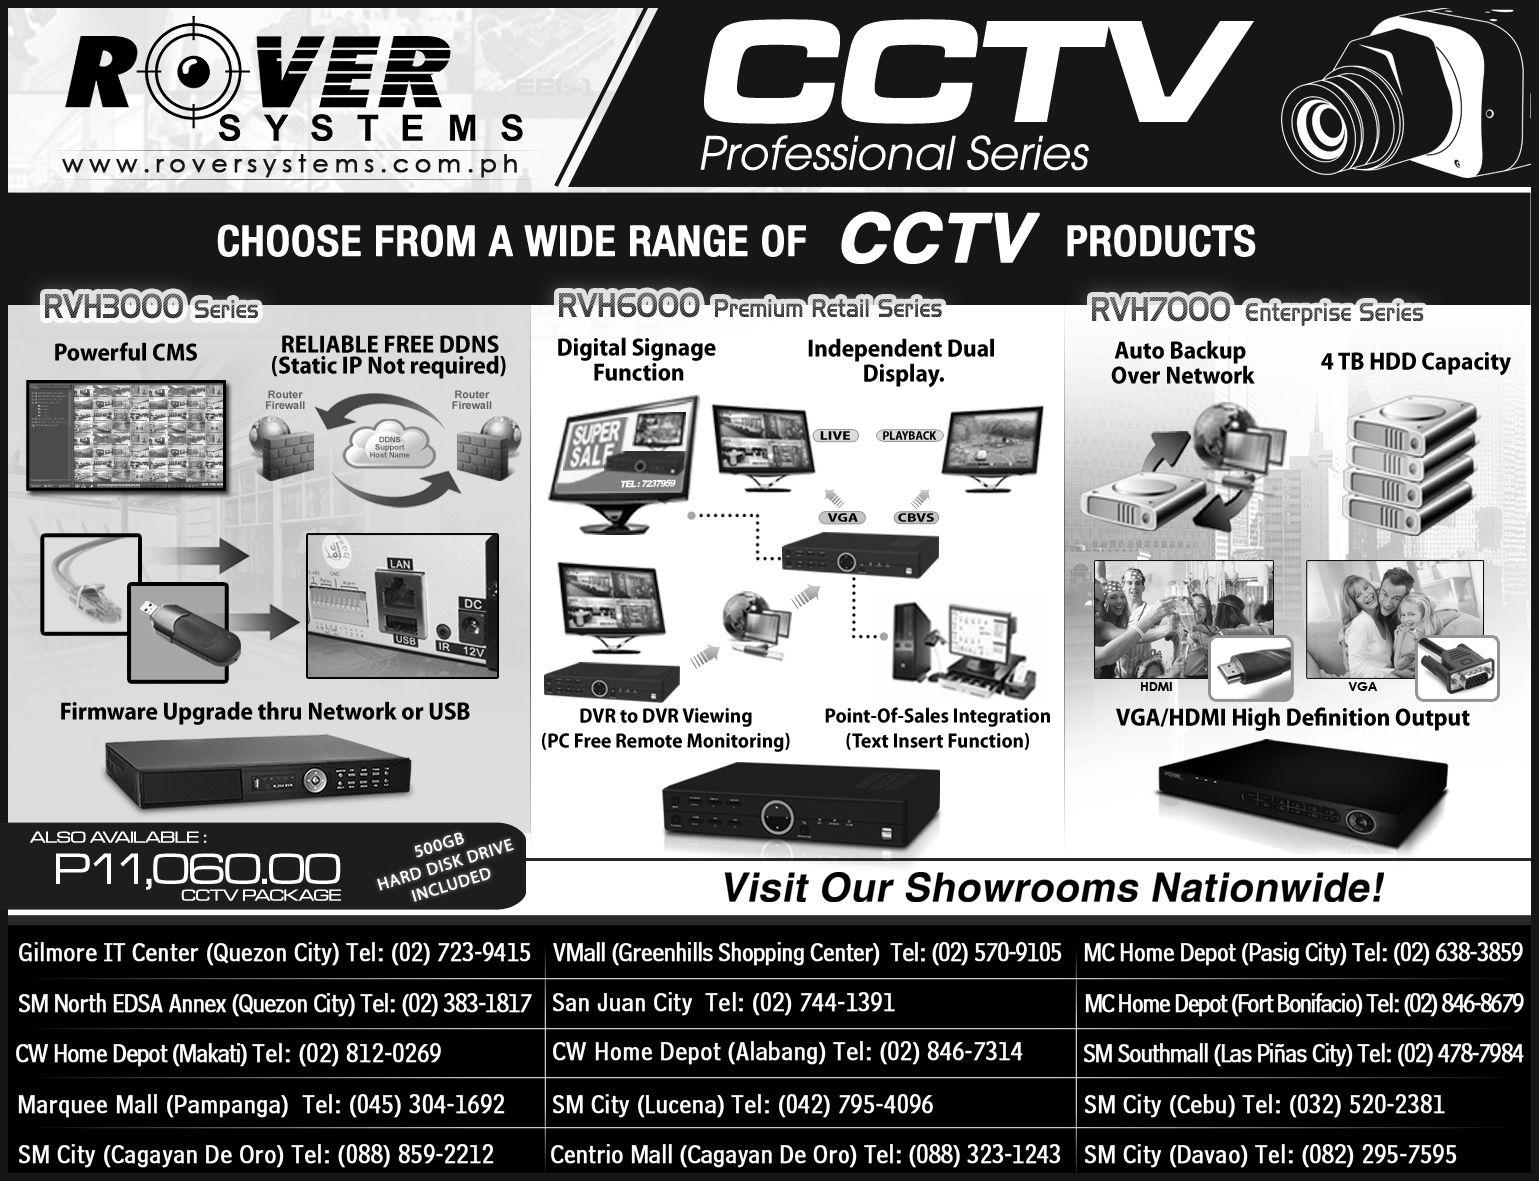 Rover CCTV Logo - Rover Systems Newspaper Ad (June - August 2013) - CCTV Philippines ...